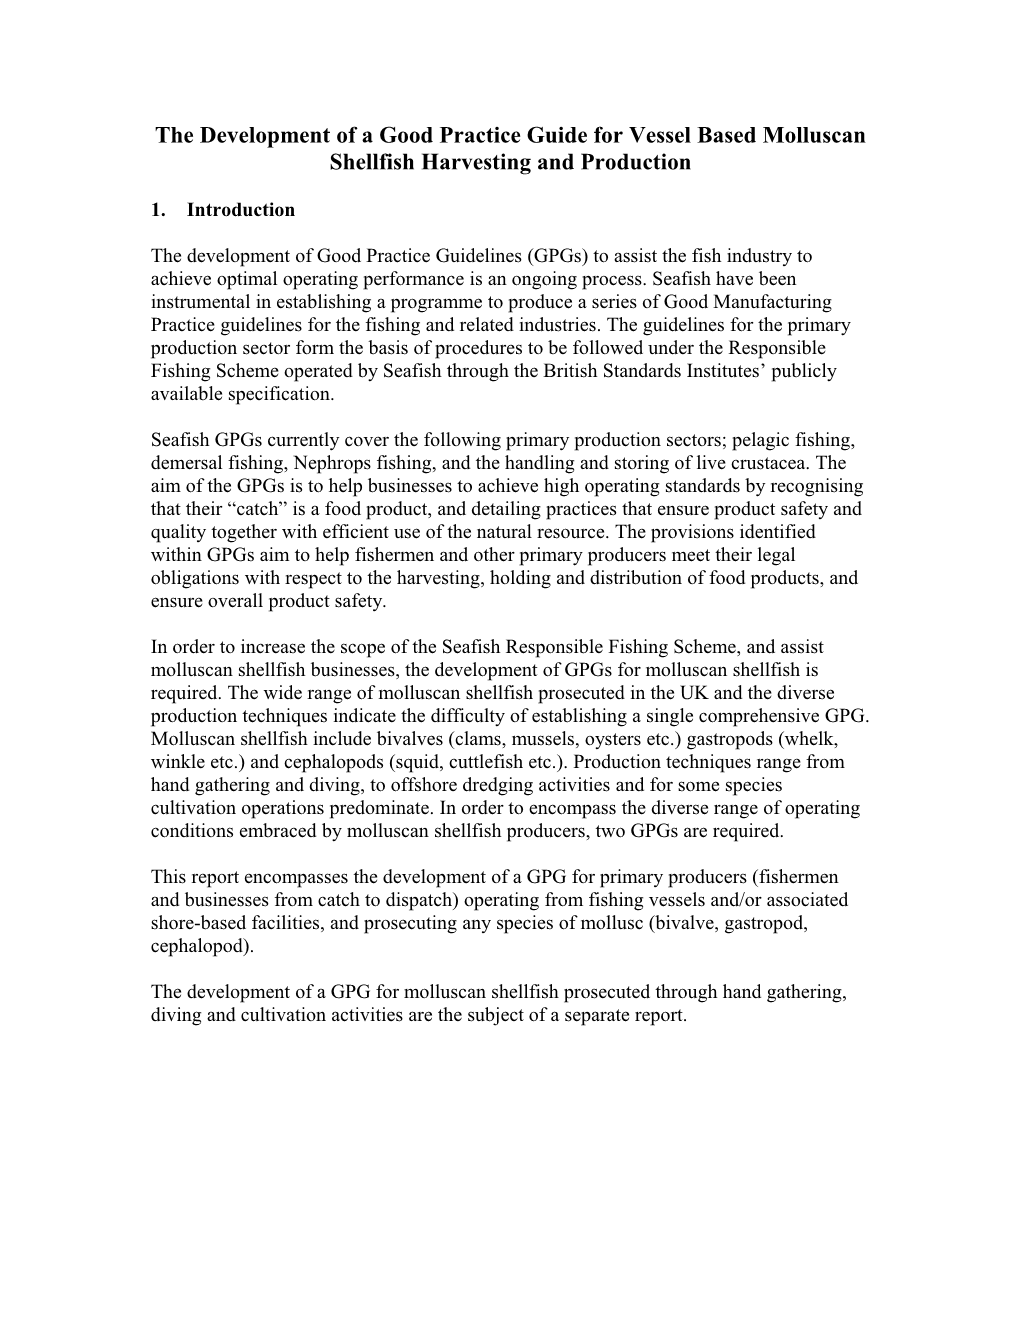 The Good Practice Guide to Vessel Based Molluscan Shellfish Harvesting and Handling